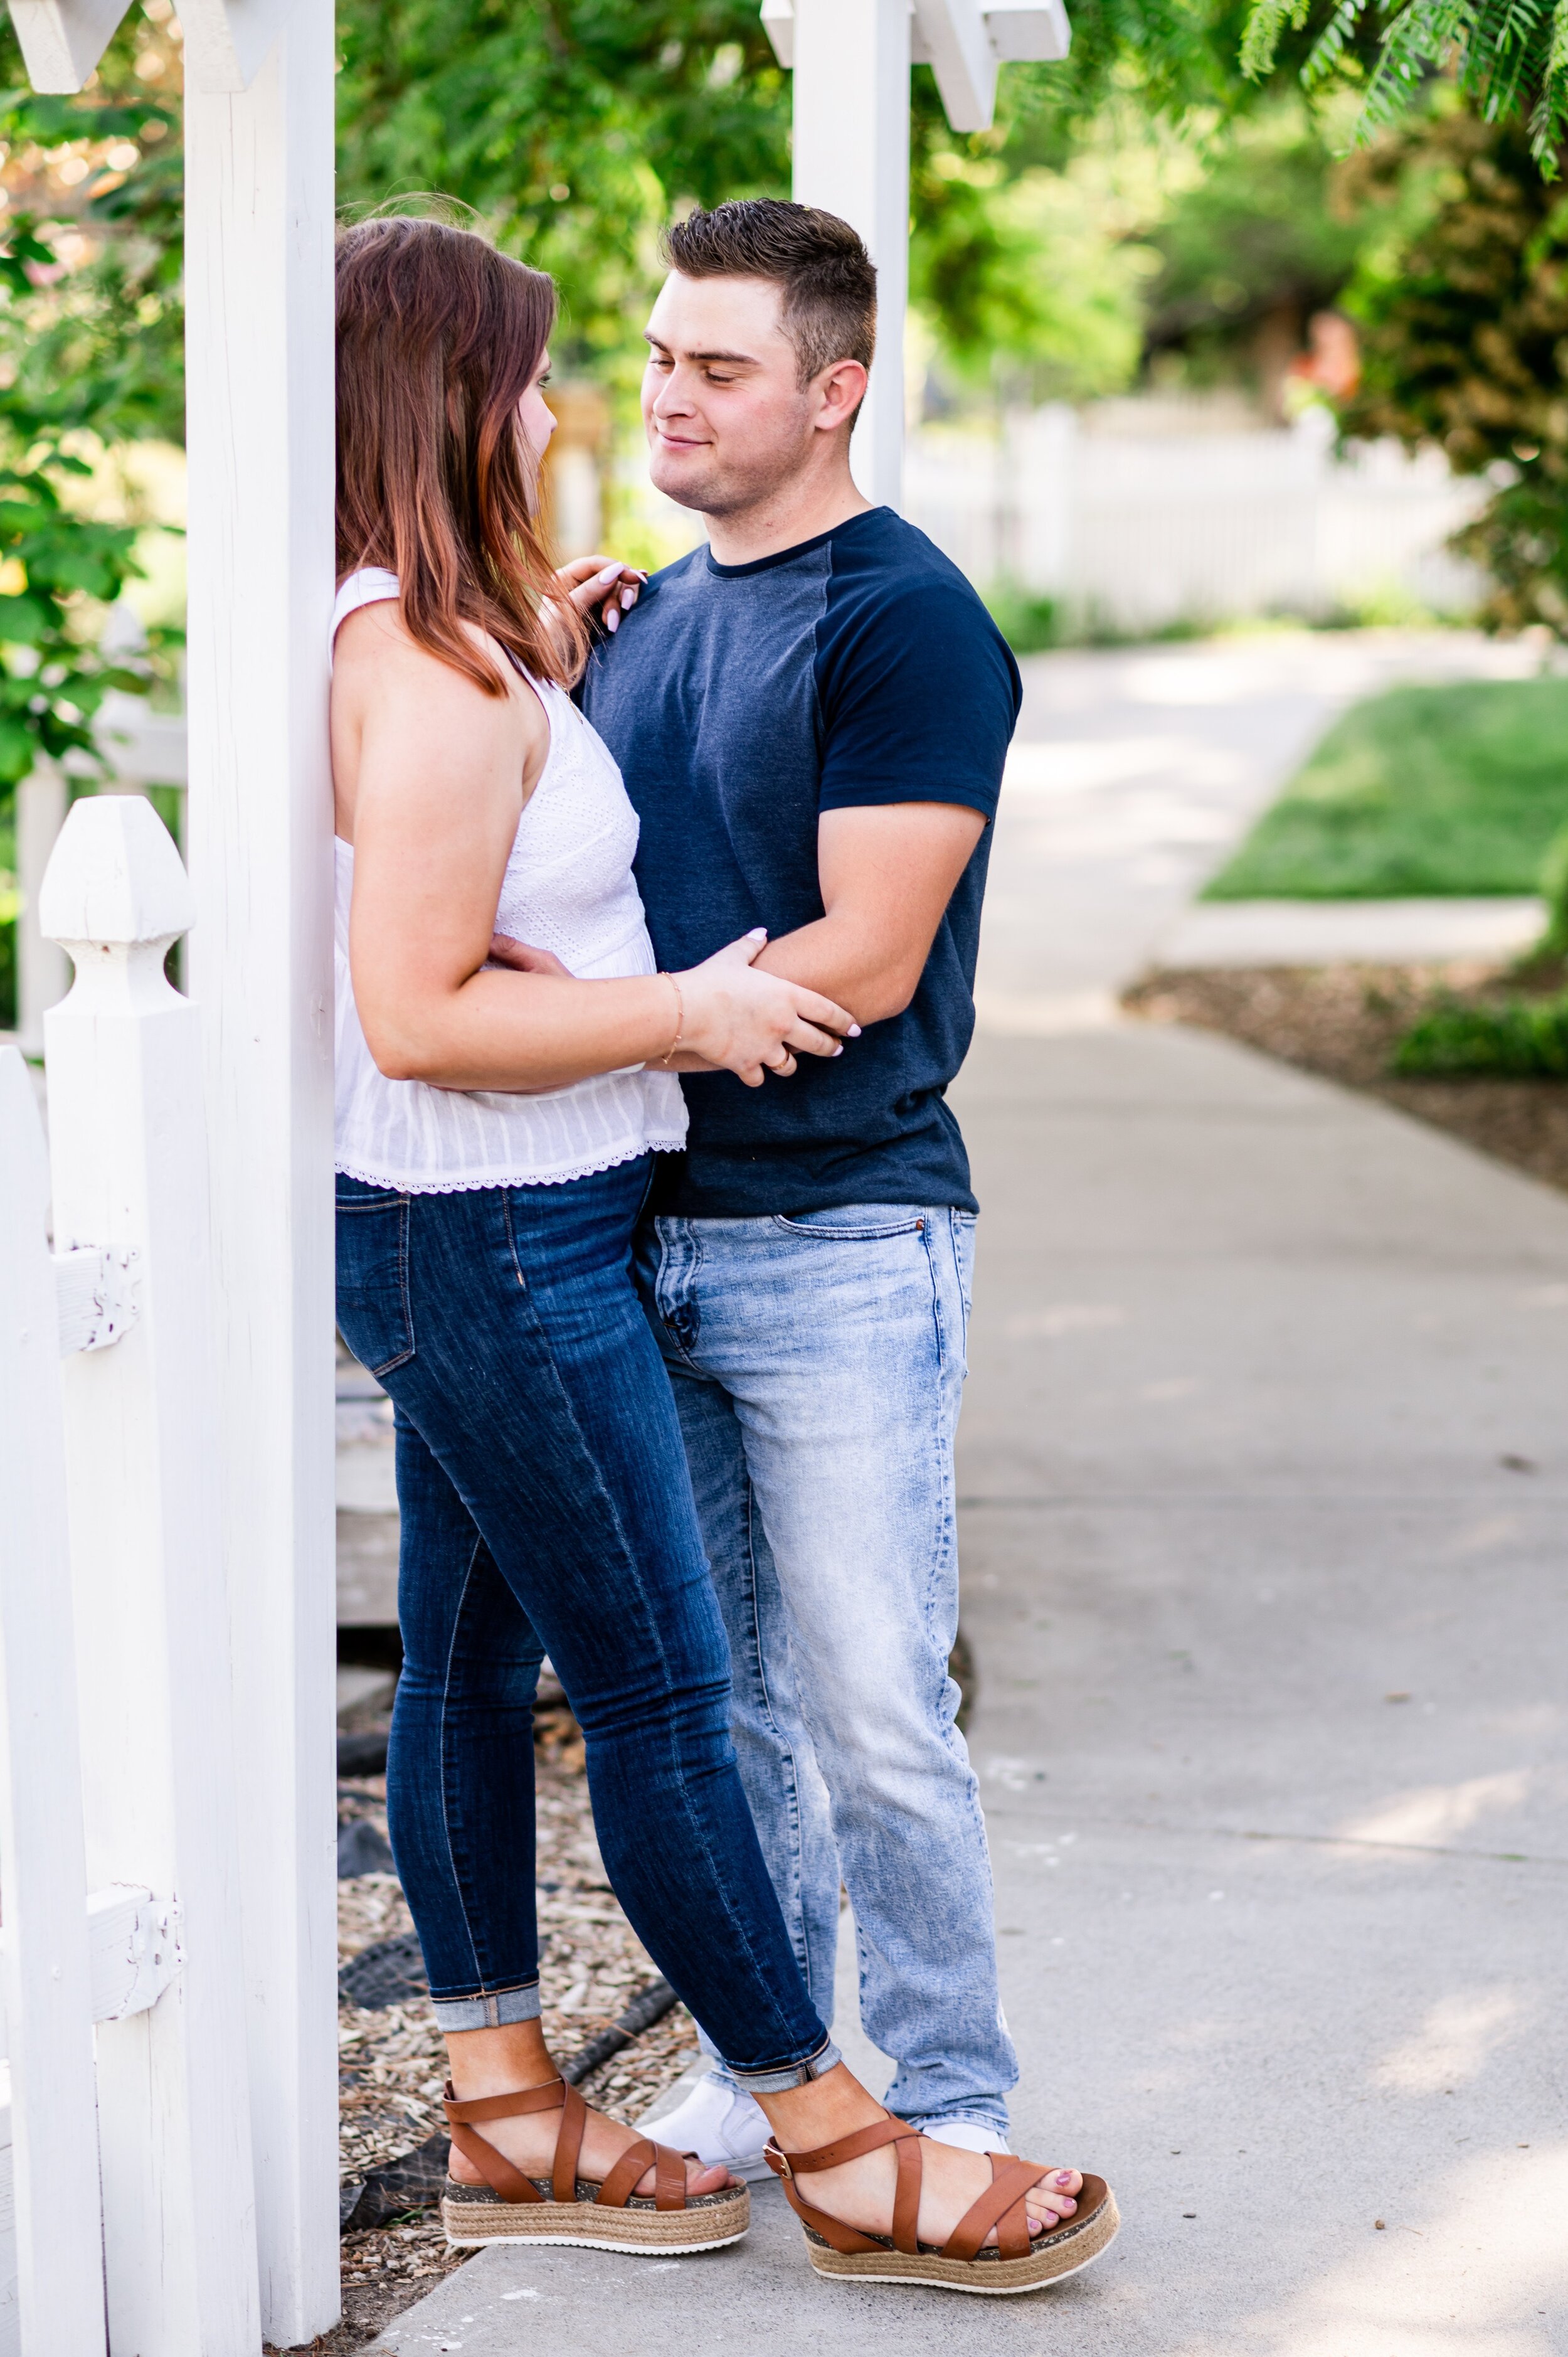 Kennewick Tri Cities Garden Engagement Photos - Morgan Tayler Photo &amp; Design - Tri Cities Engagement Photographer - Tri Cities Wedding Photographer - What to Wear to Engagement Photos